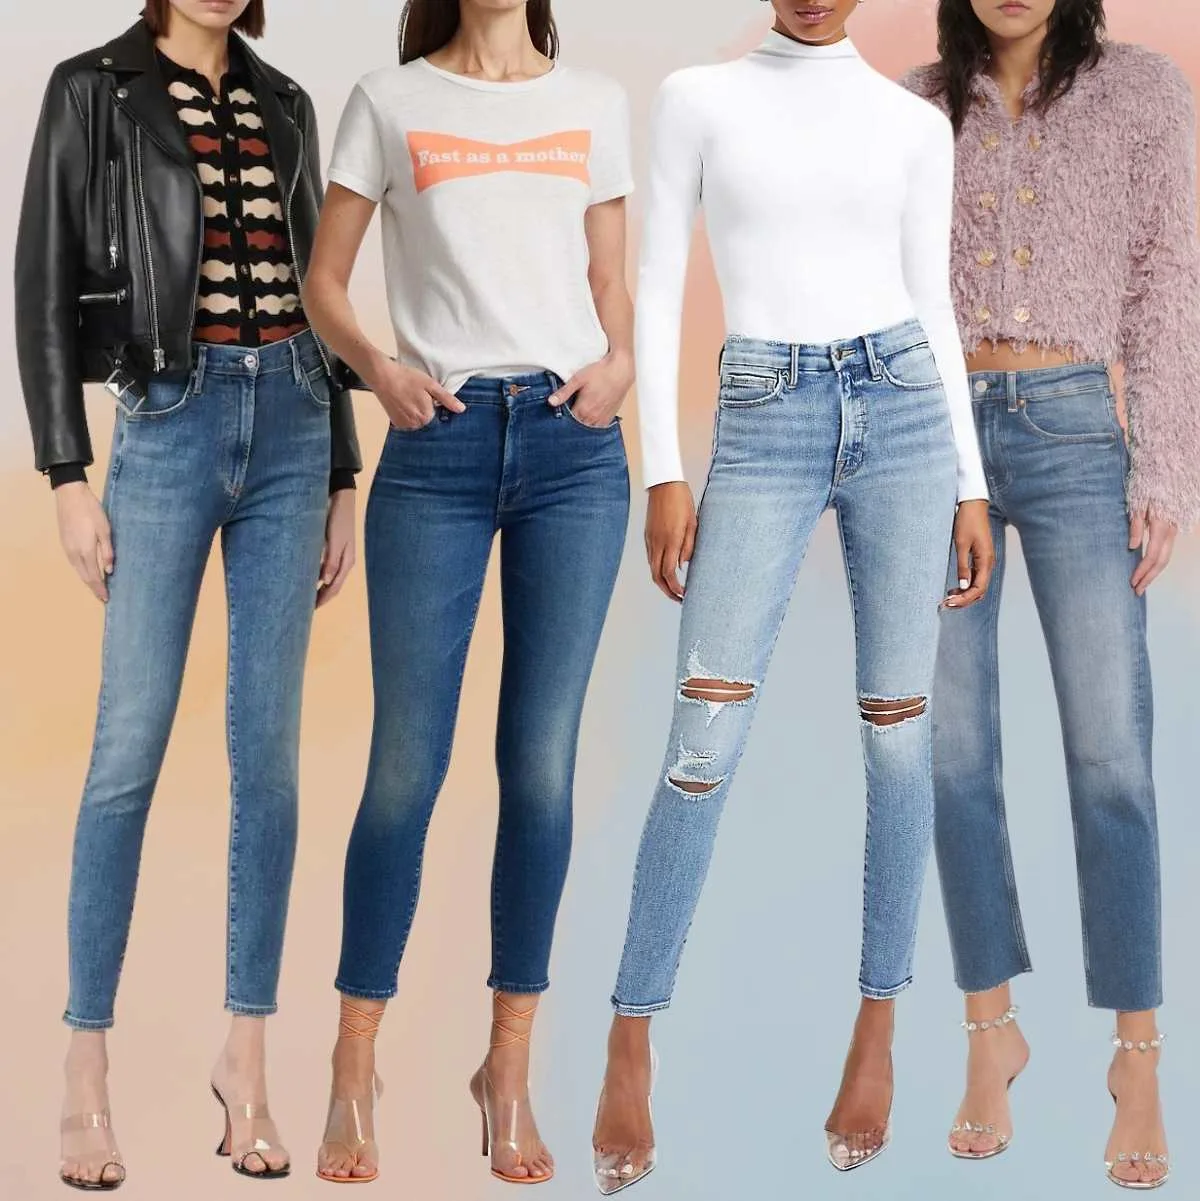 Curious What Shoes to Wear with Skinny Jeans Outfits? Here are 15!